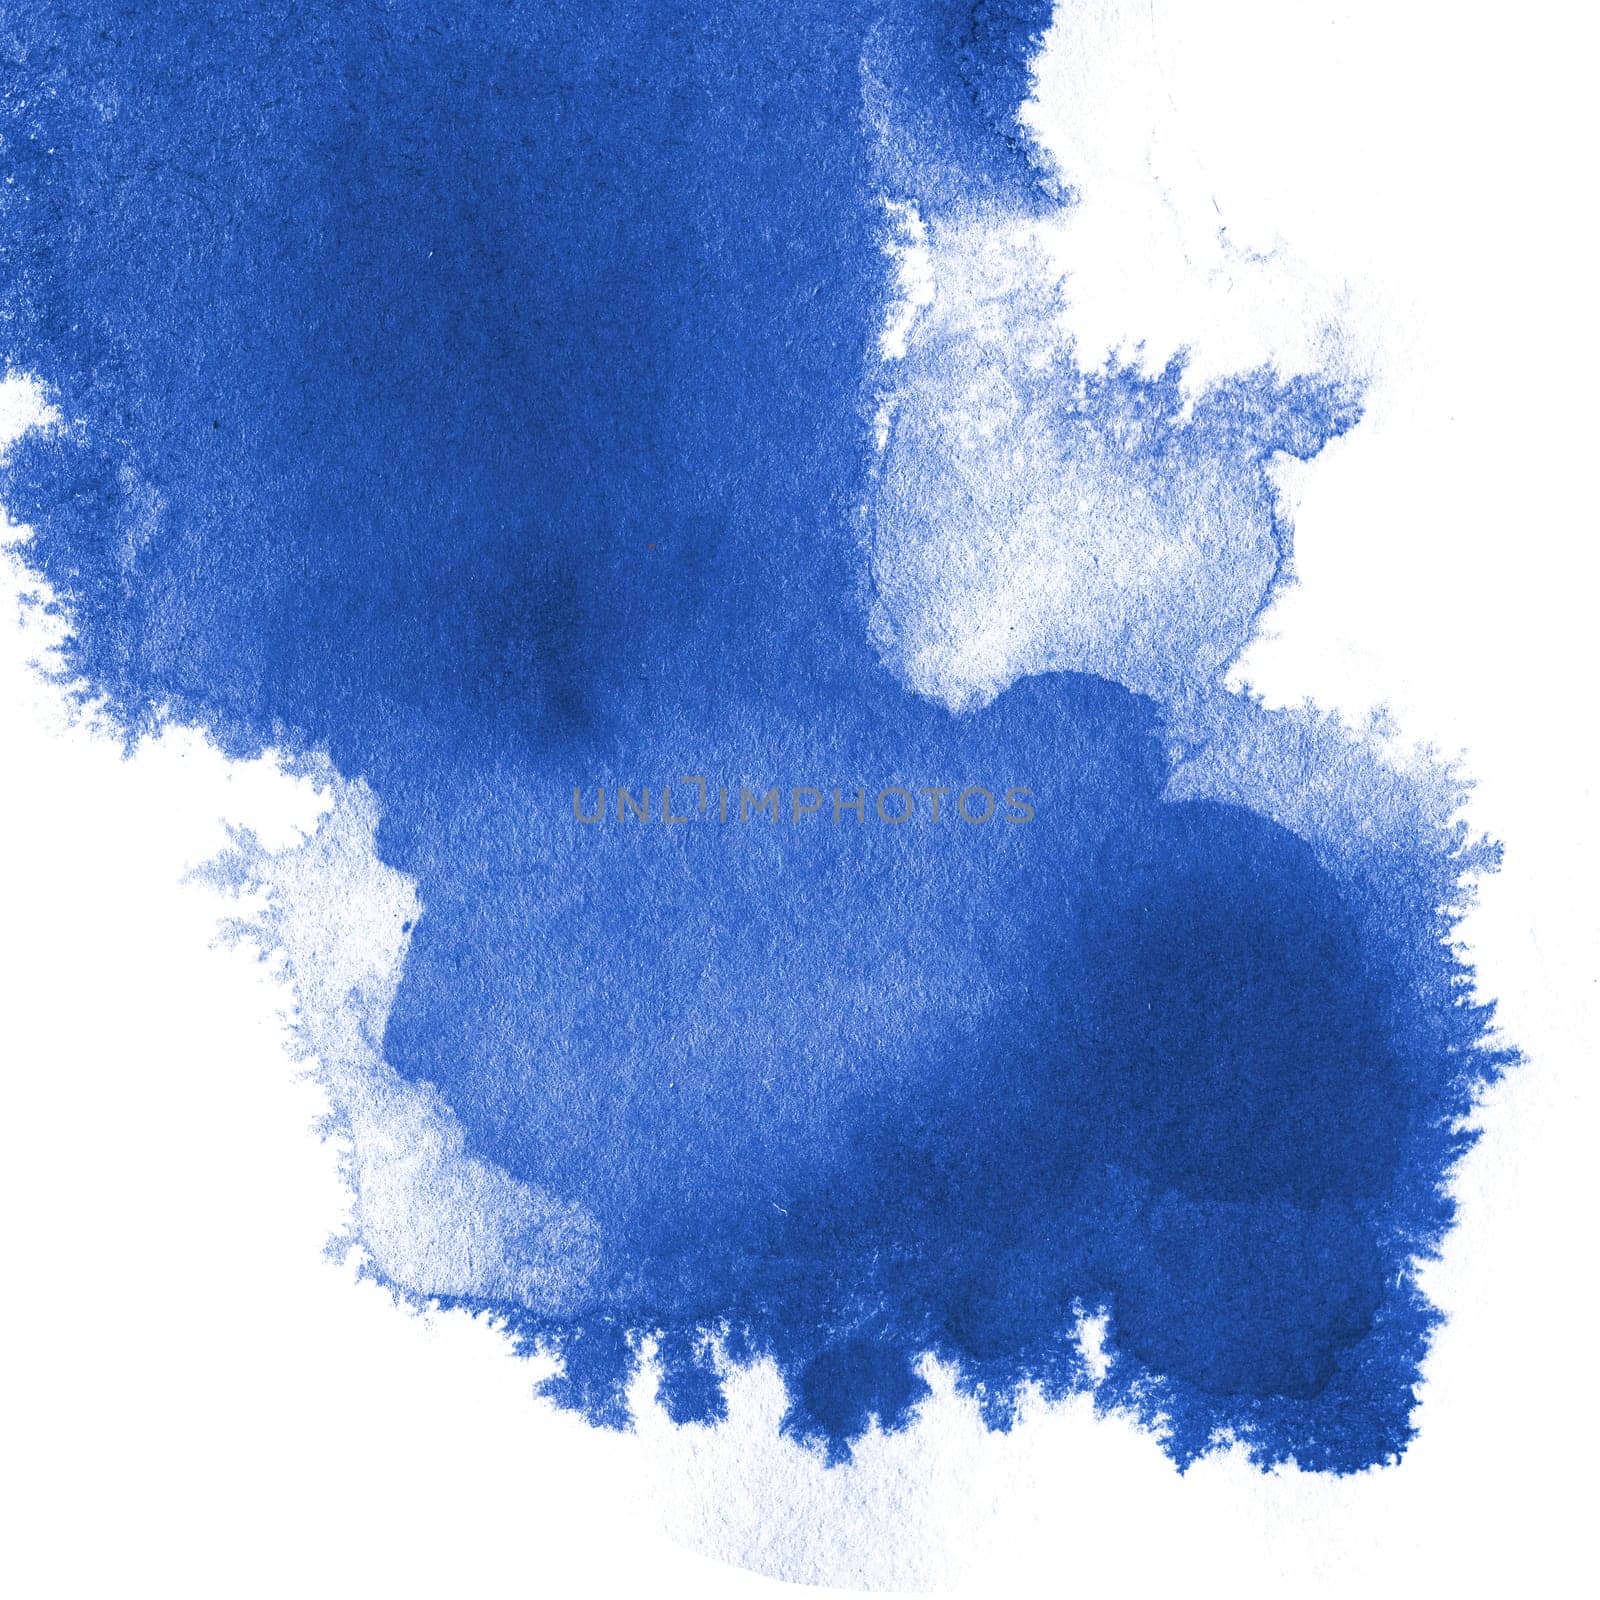 Hand Drawn Bright Background with Watercolor Blue Splashes. Blue and White Background.